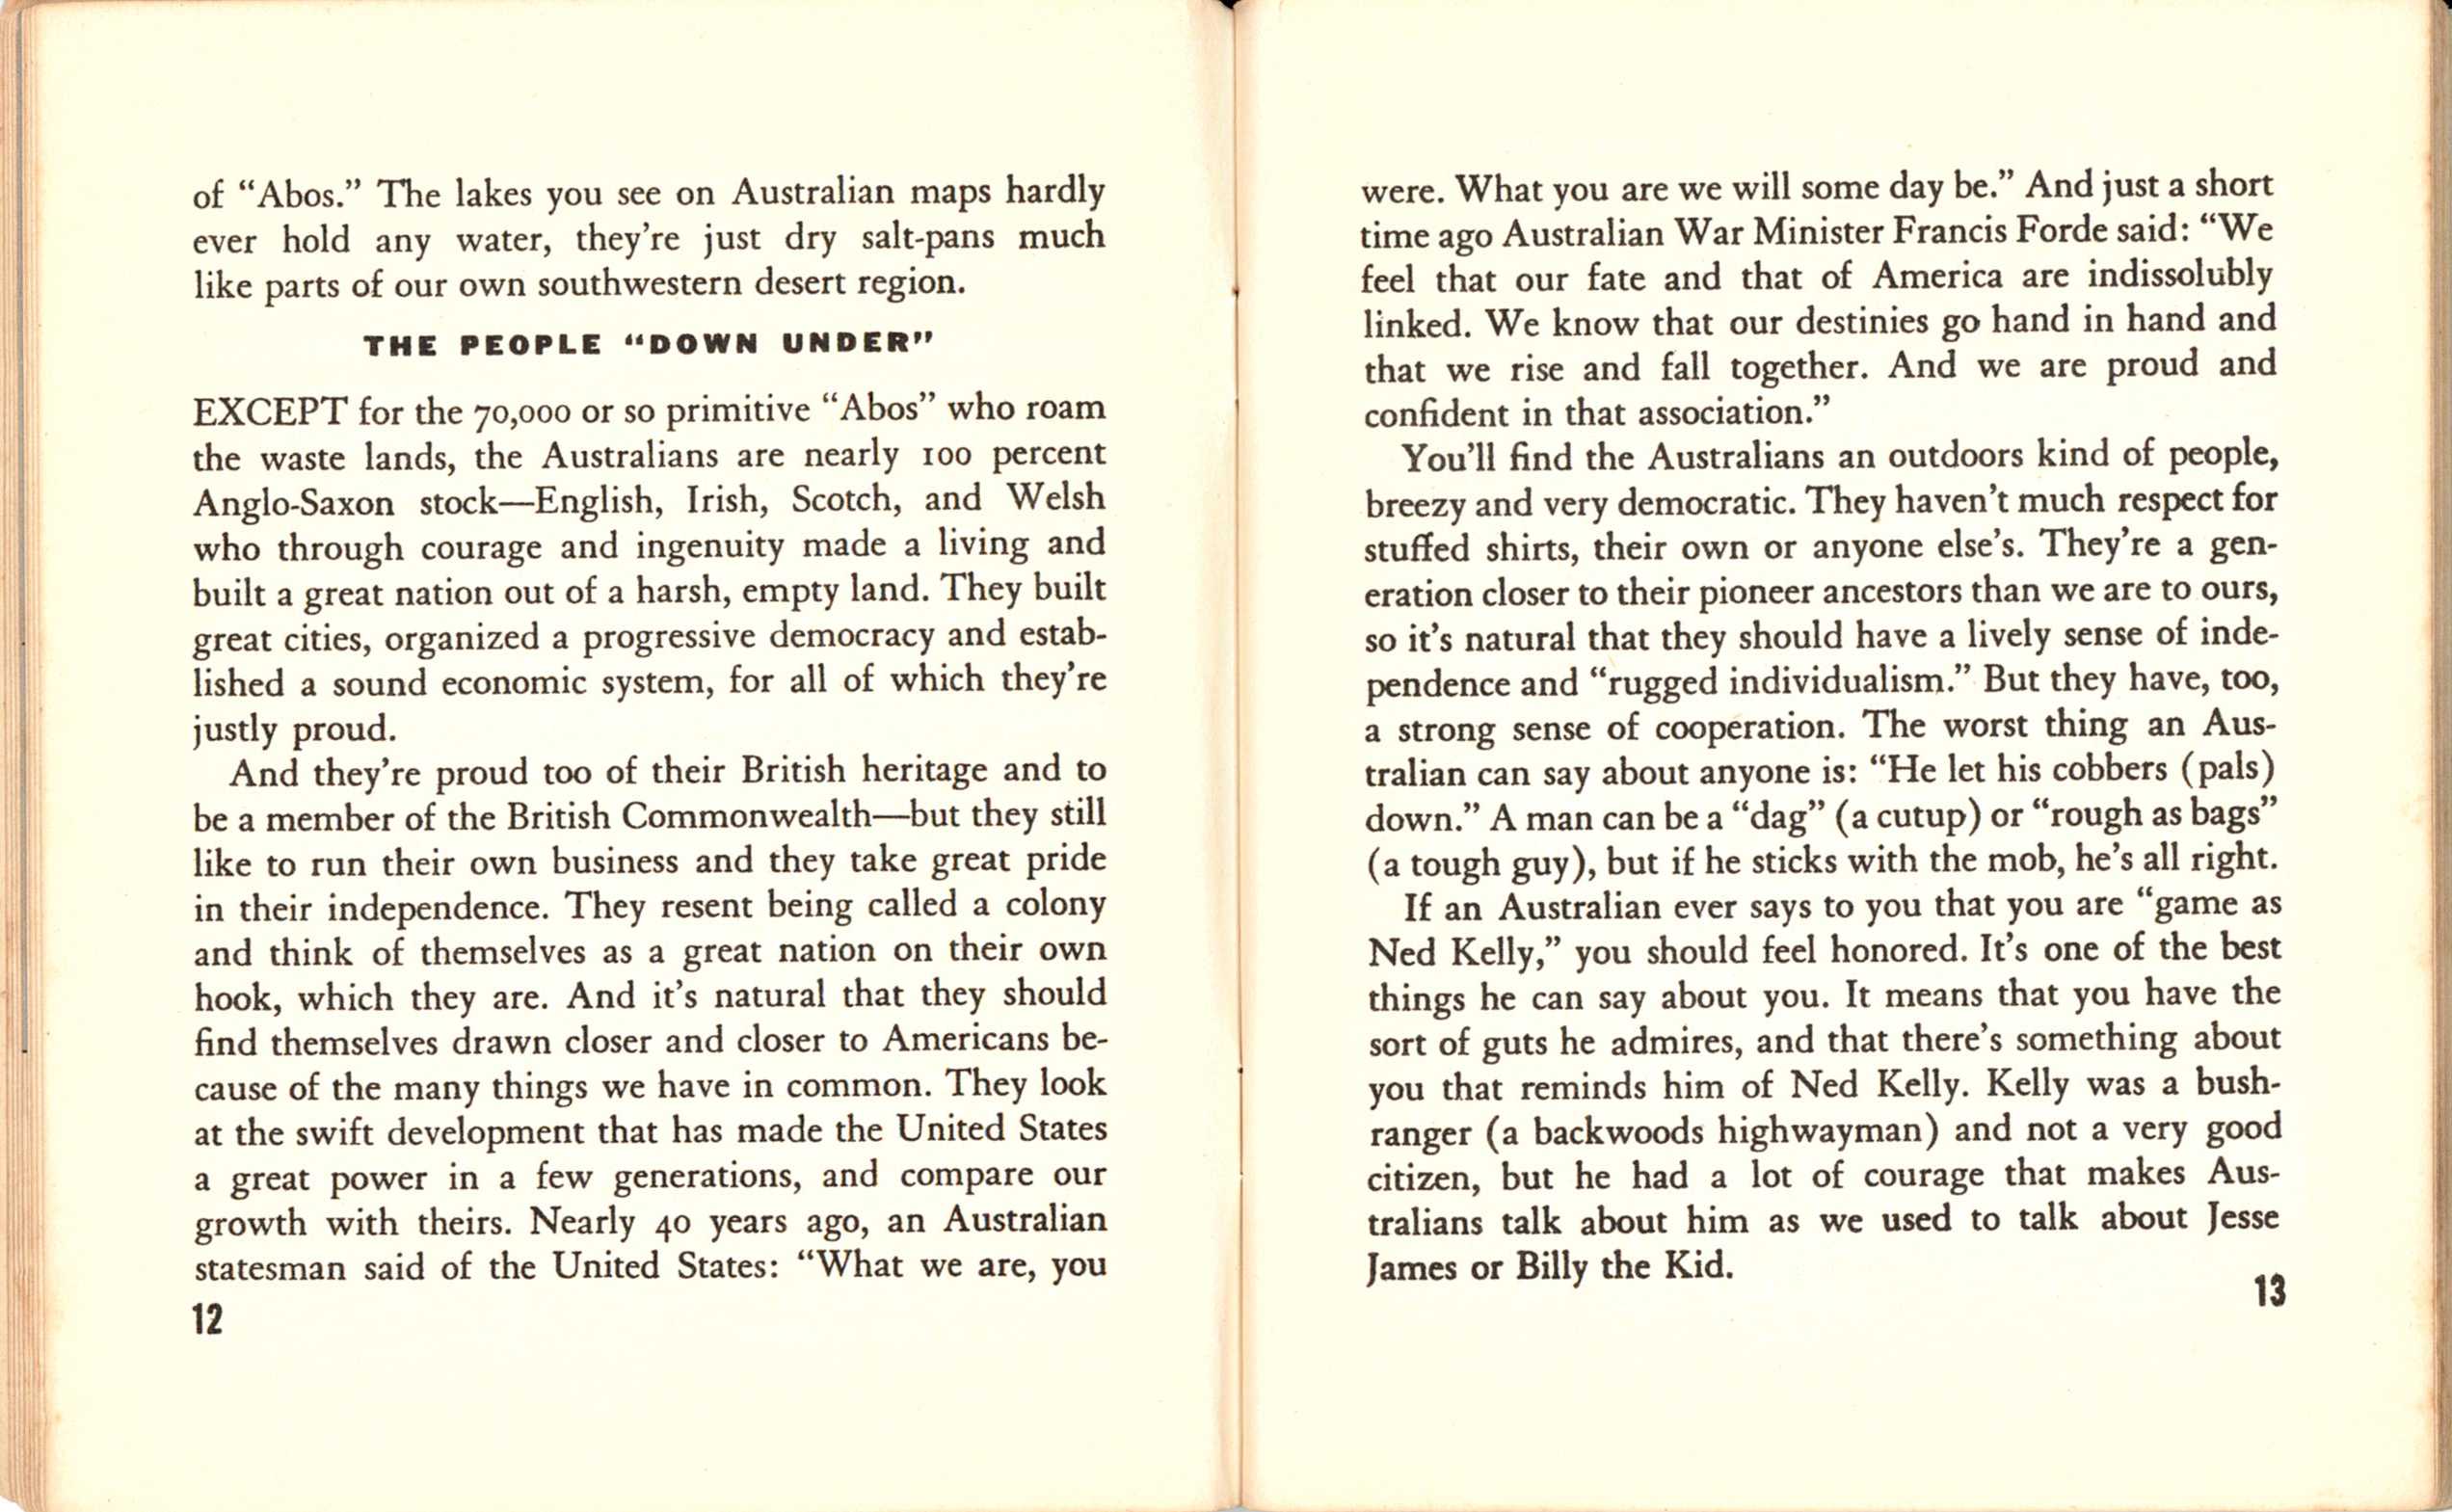 Pocket Guide to Australia page 13